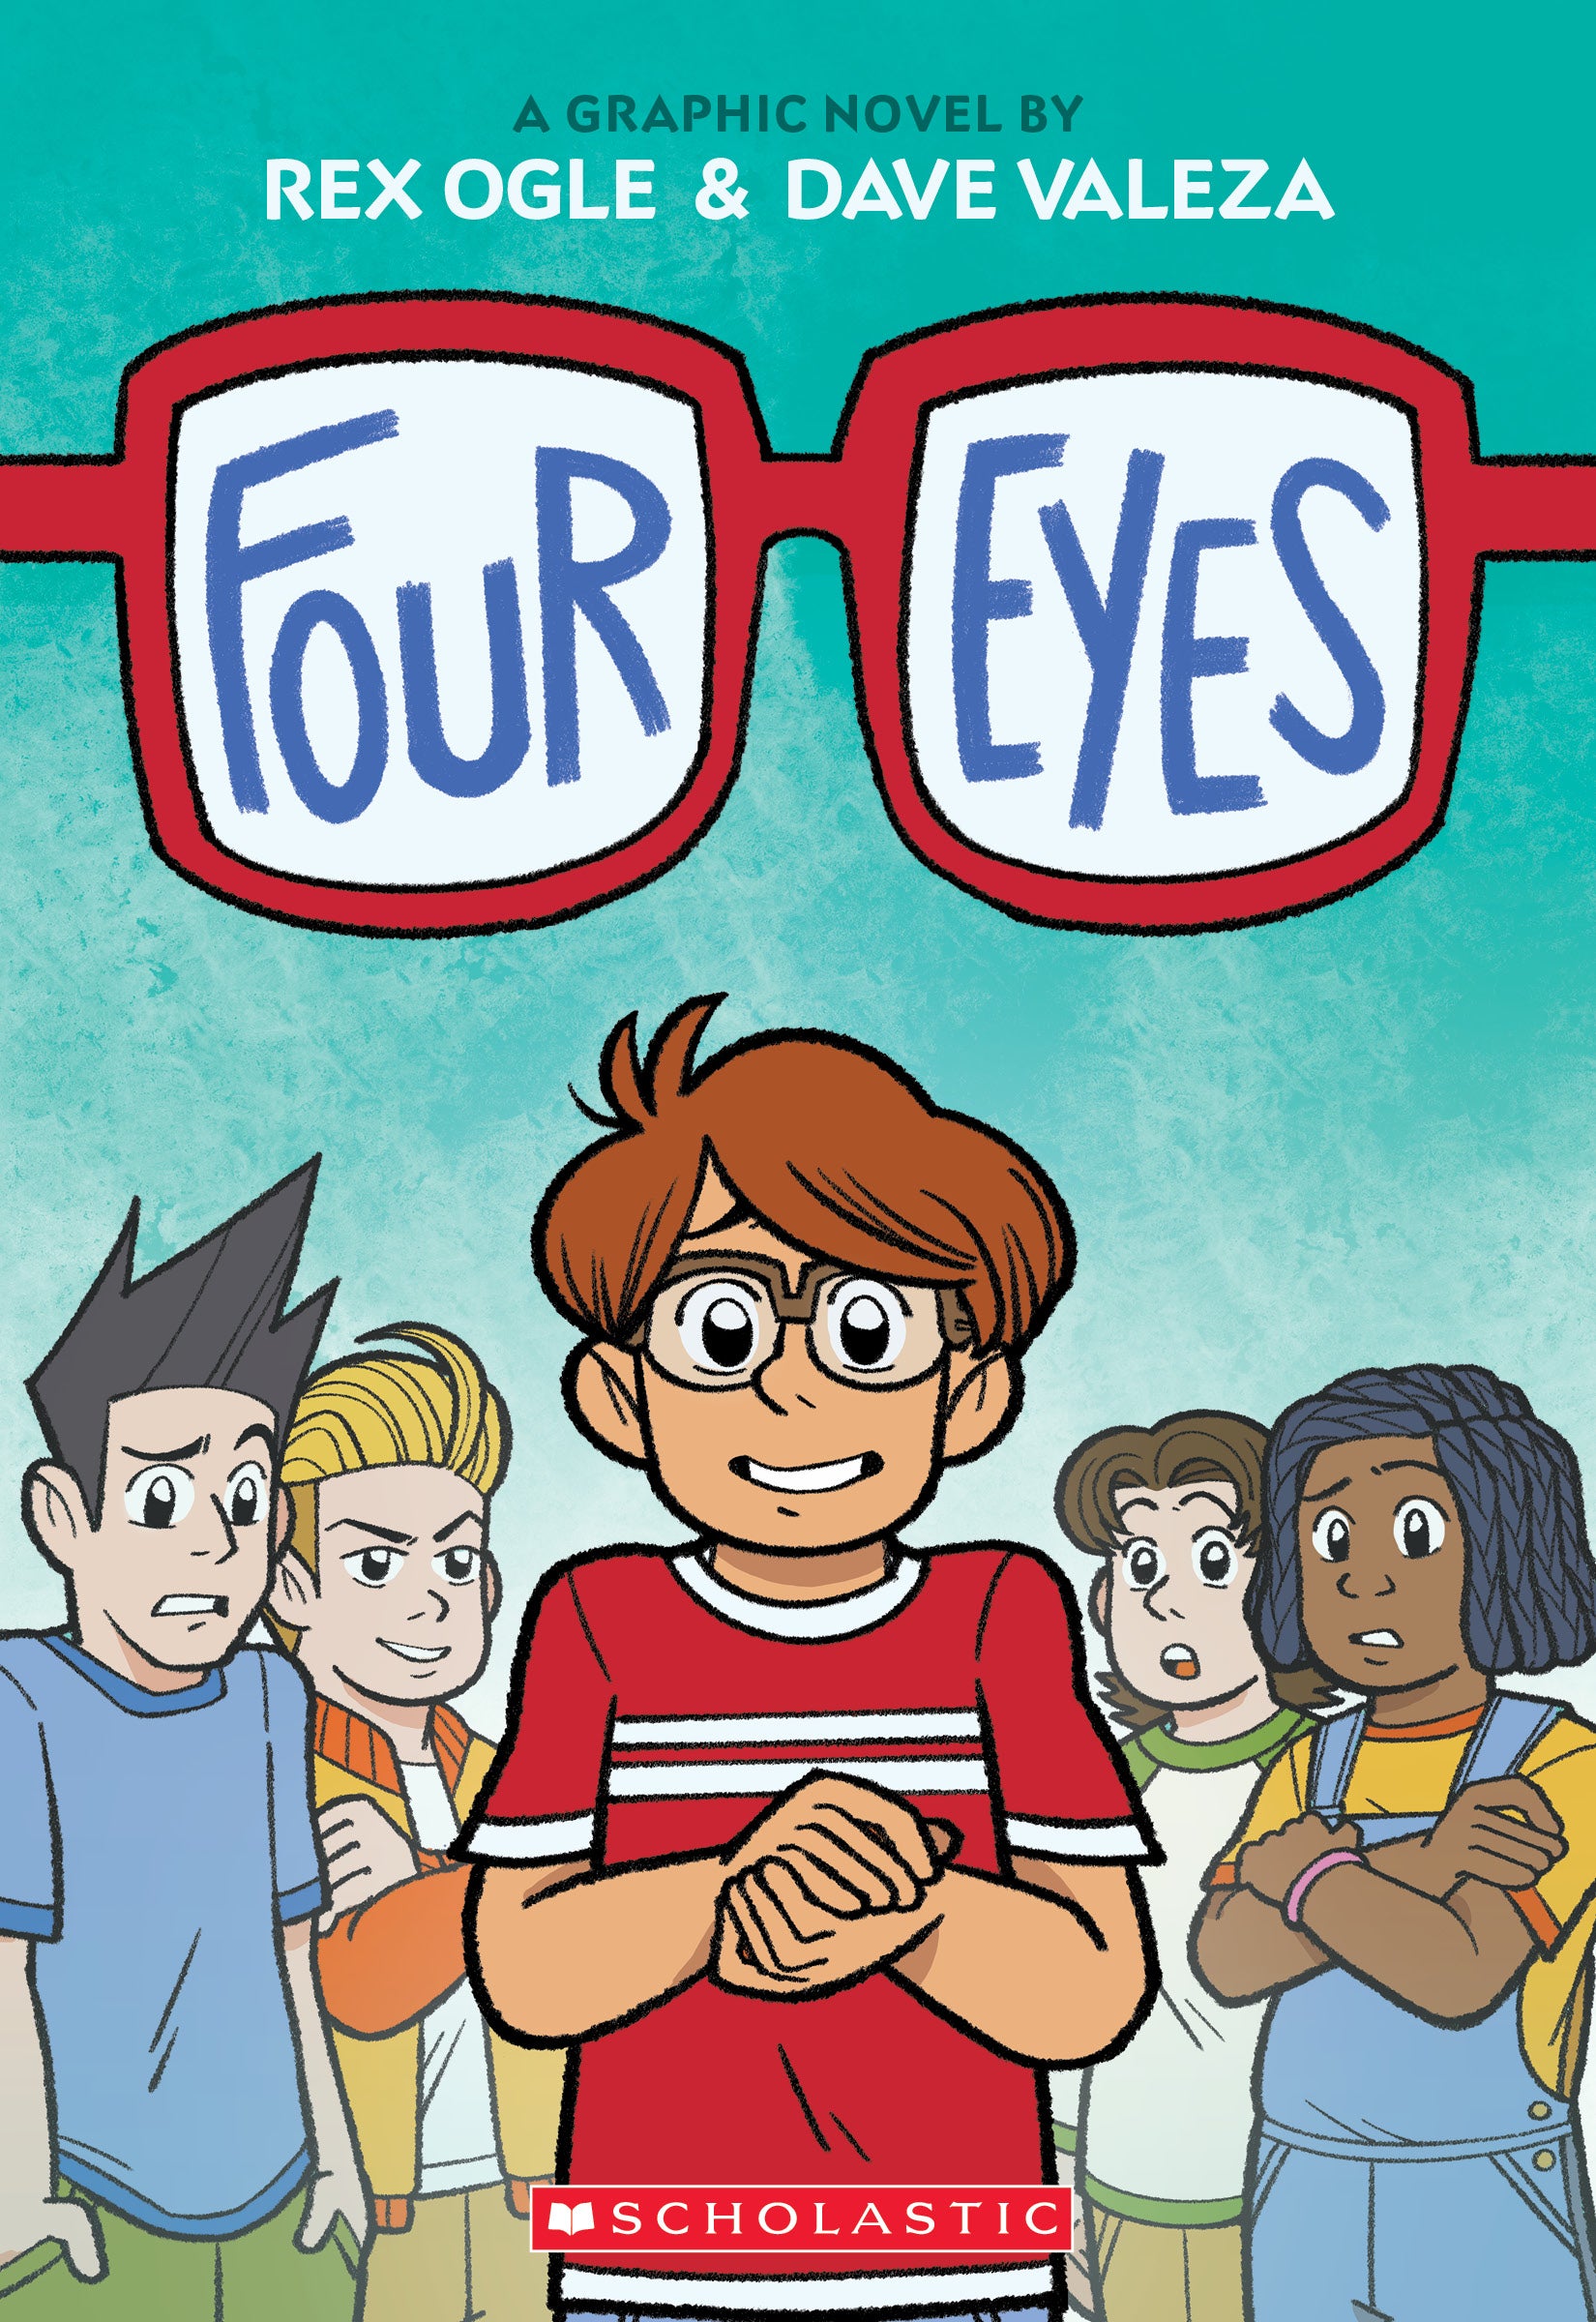 Full image cover of Four Eyes featuring a character in the middle wearing glasses, and four kids behind him